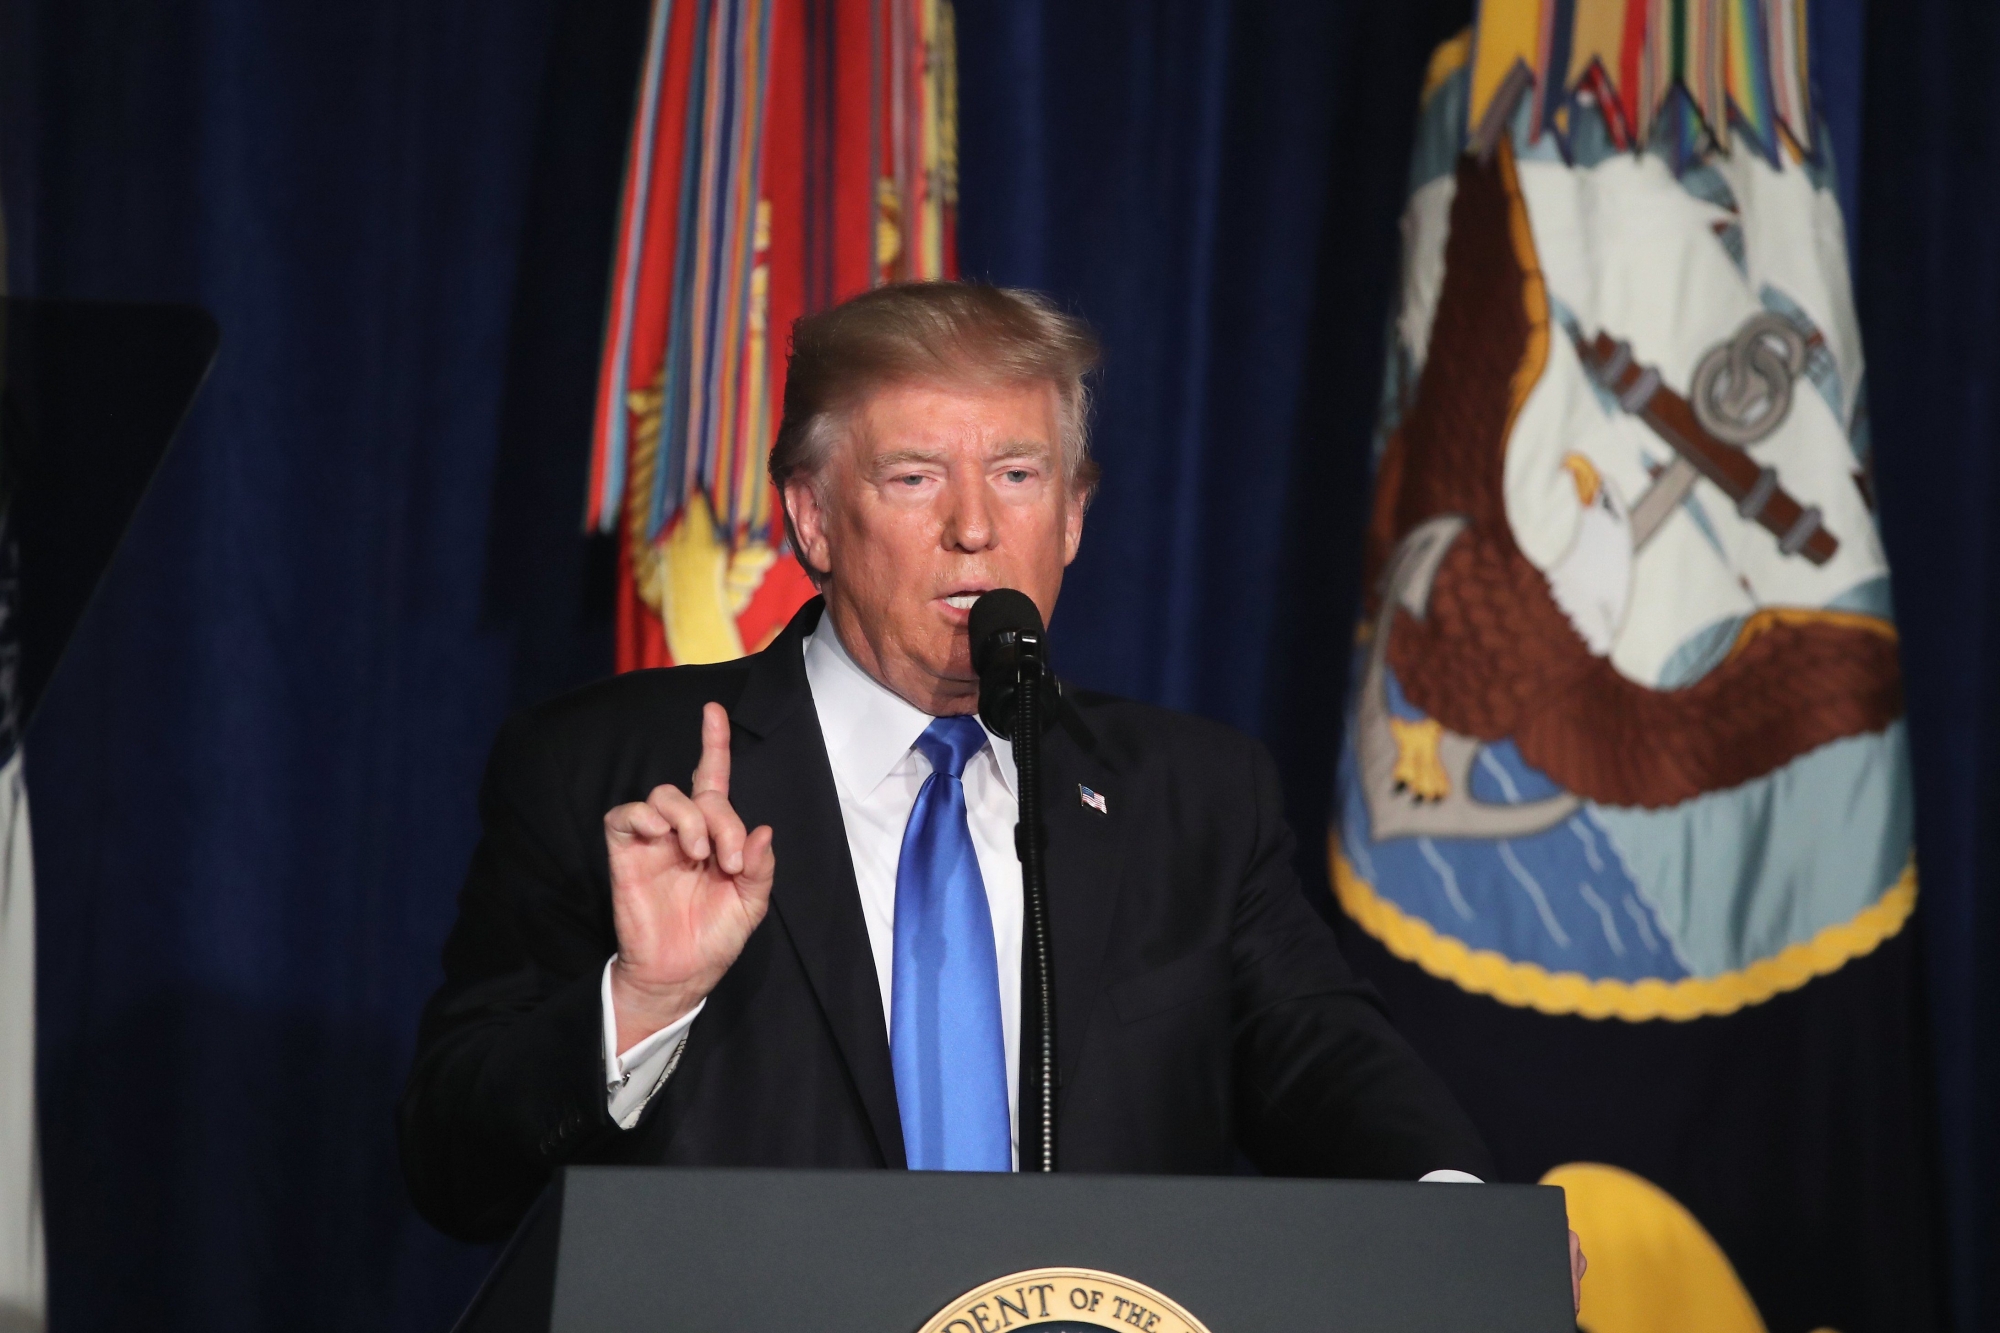 epa06155613 US President Donald J. Trump delivers remarks on Americaís military involvement in Afghanistan at the Fort Myer military base in Arlington, Virginia, USA, 21 August 2017. Trump was expected to announce a modest increase in troop levels in Afghanistan, the result of a growing concern by the Pentagon over setbacks on the battlefield for the Afghan military against Taliban and al-Qaeda forces.  EPA/MARK WILSON / POOL USA GOVERNMENT AFGHANISTAN ADDRESS